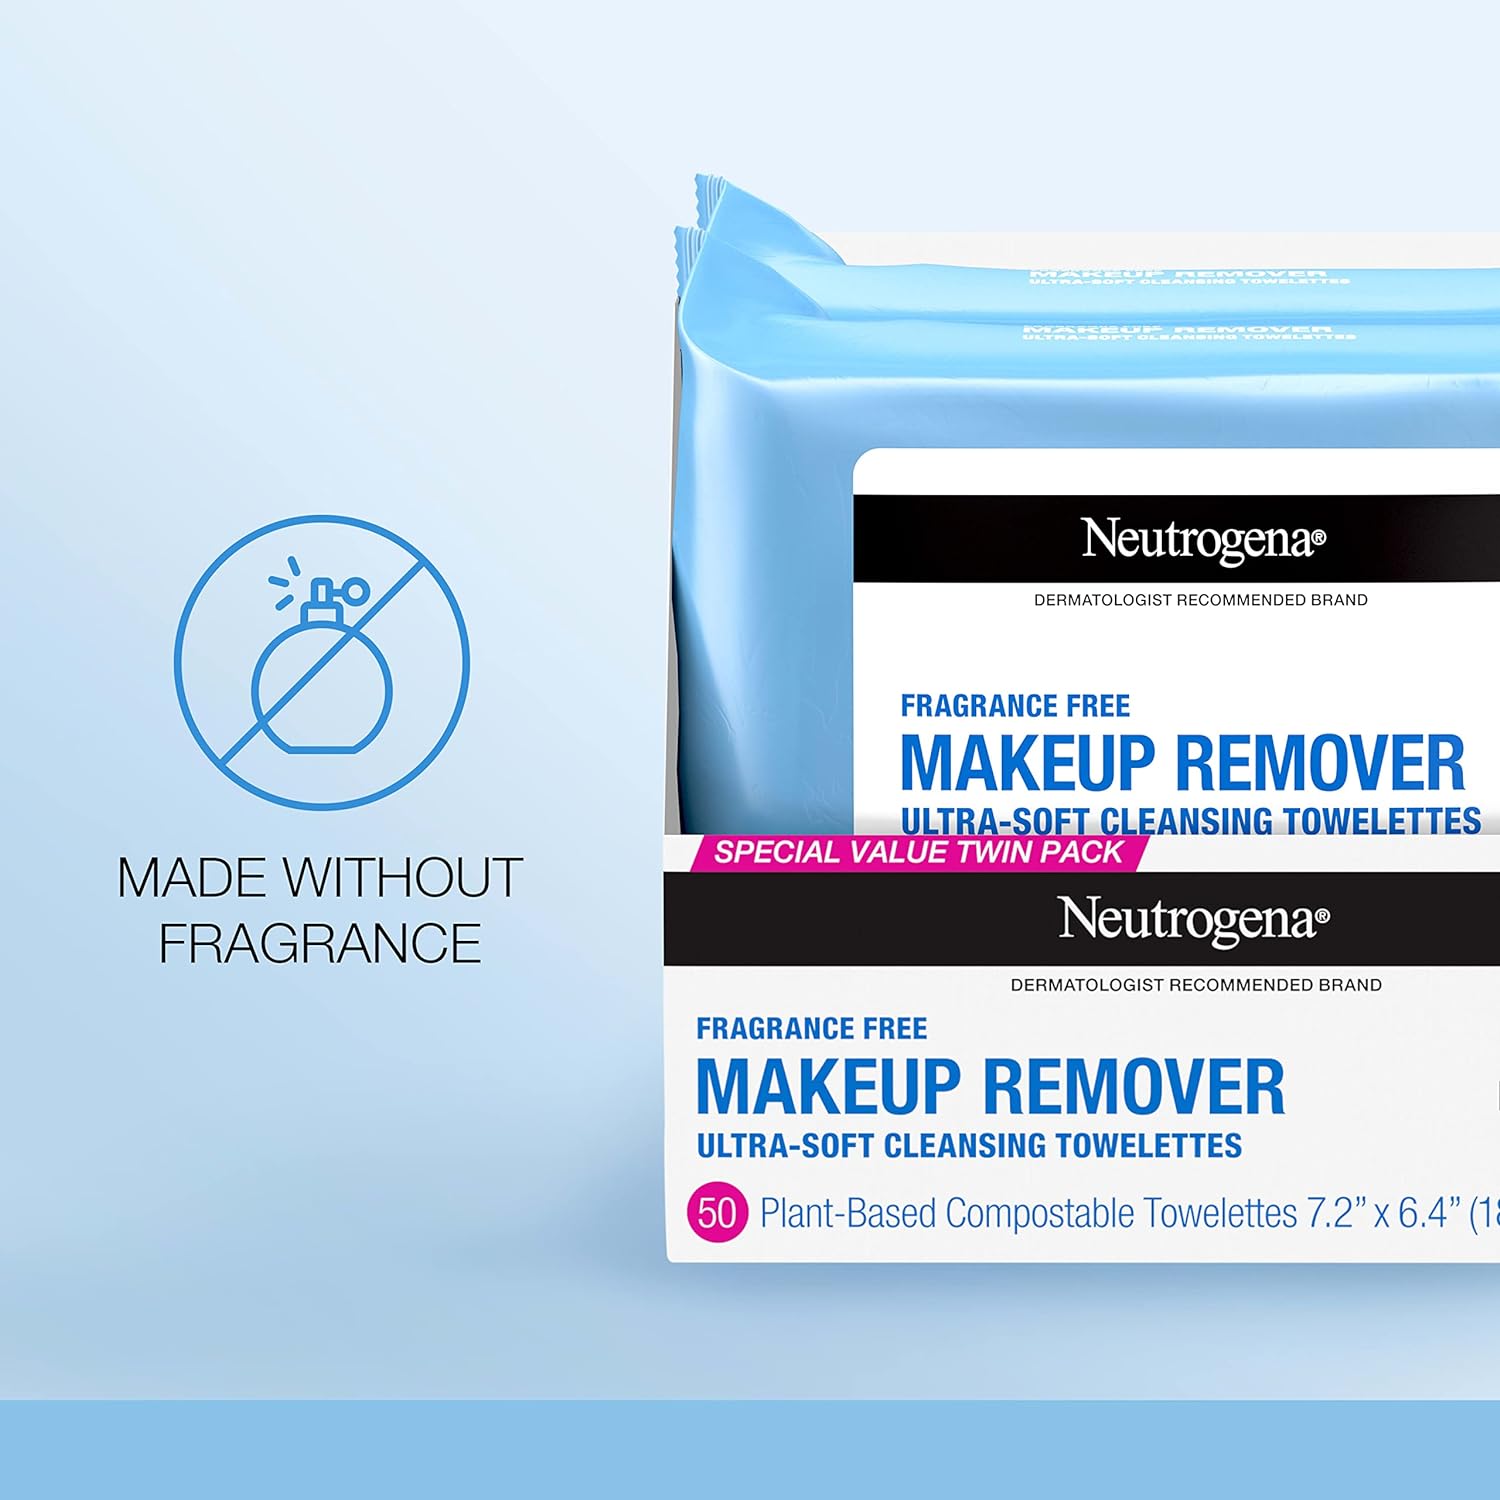 Neutrogena Cleansing Fragrance Free Makeup Remover Face Wipes, Cleansing Facial Towelettes for Waterproof Makeup, Alcohol-Free, Unscented, 100% Plant-Based Fibers, Twin Pack, 2 x 25 ct